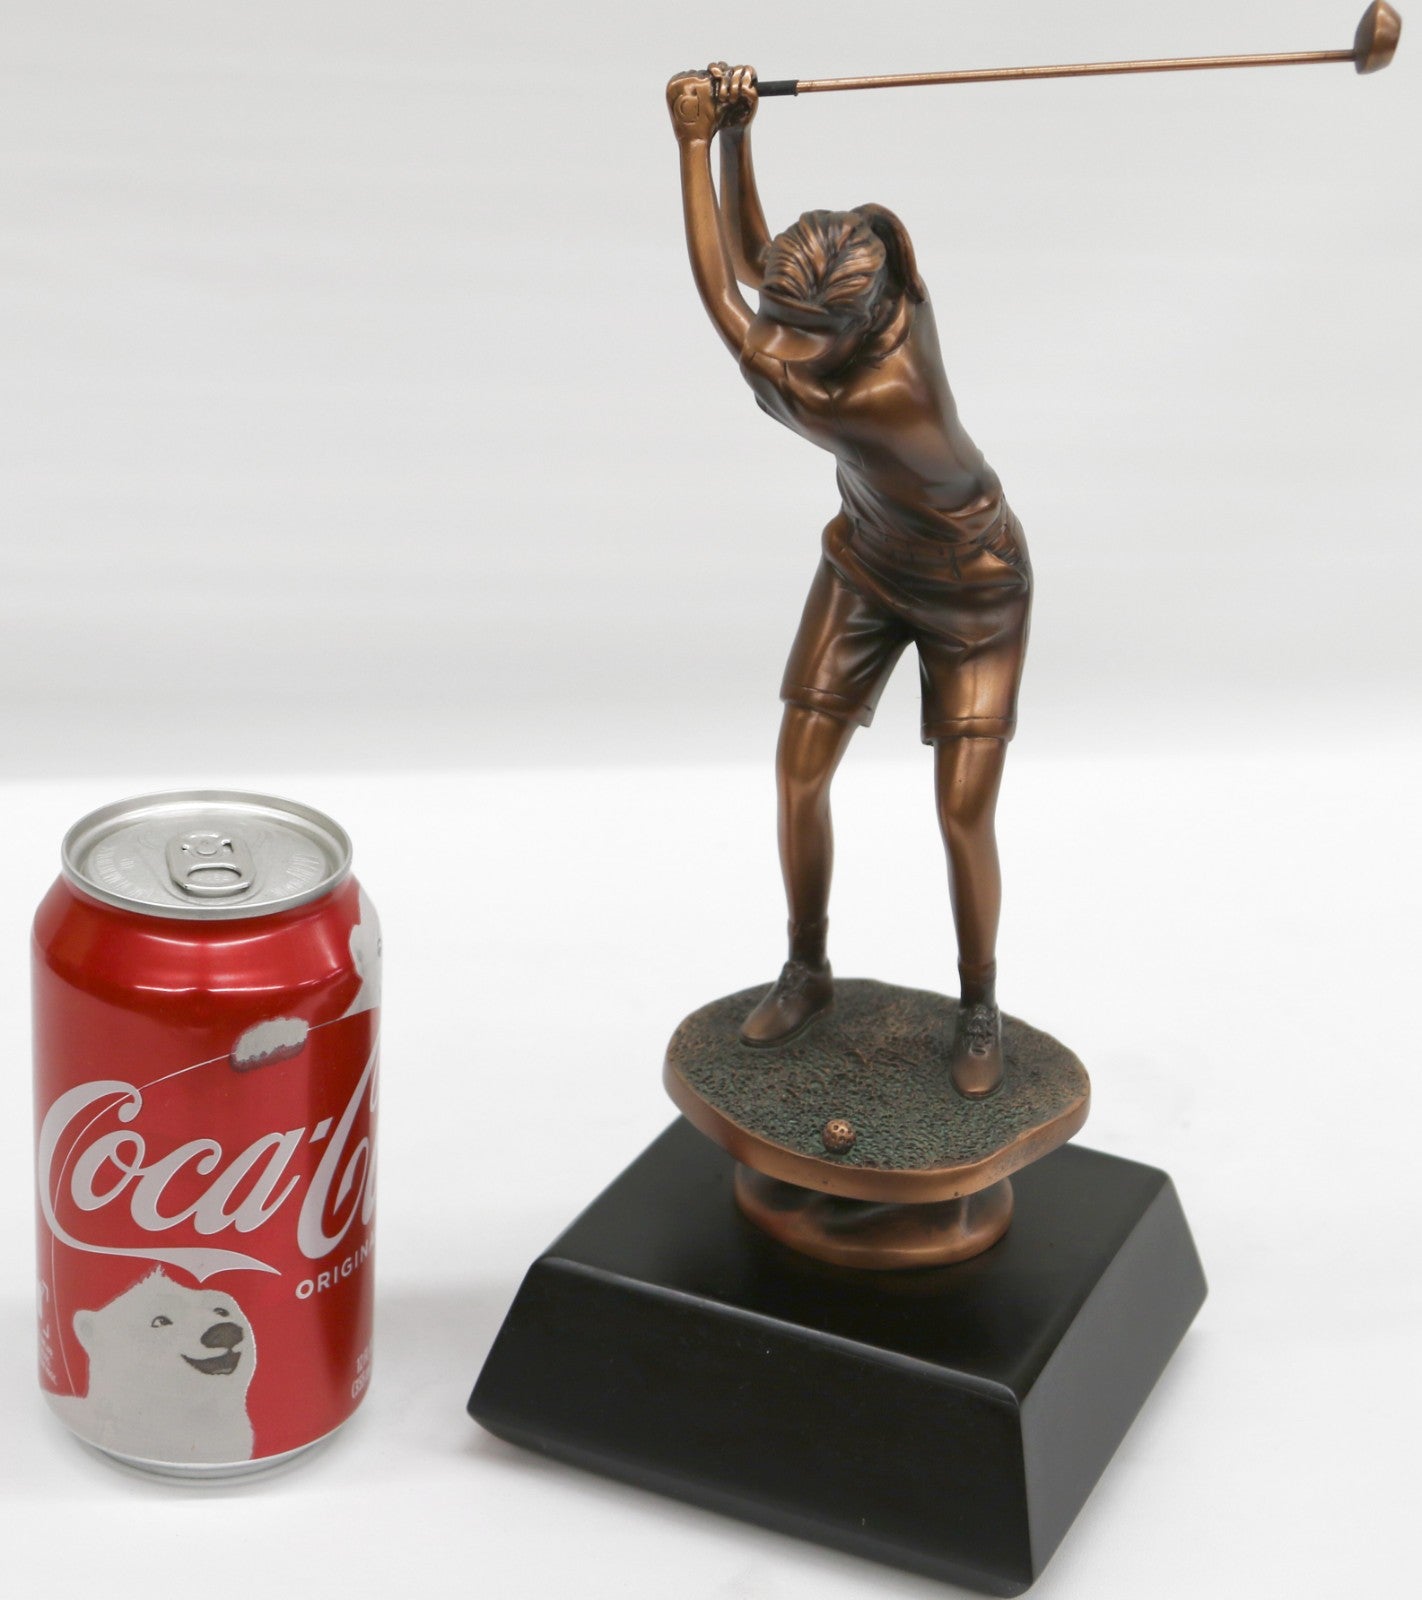 Golfer Bronze Plated Golf Statue Sculpture Figure With Large Base Figurine